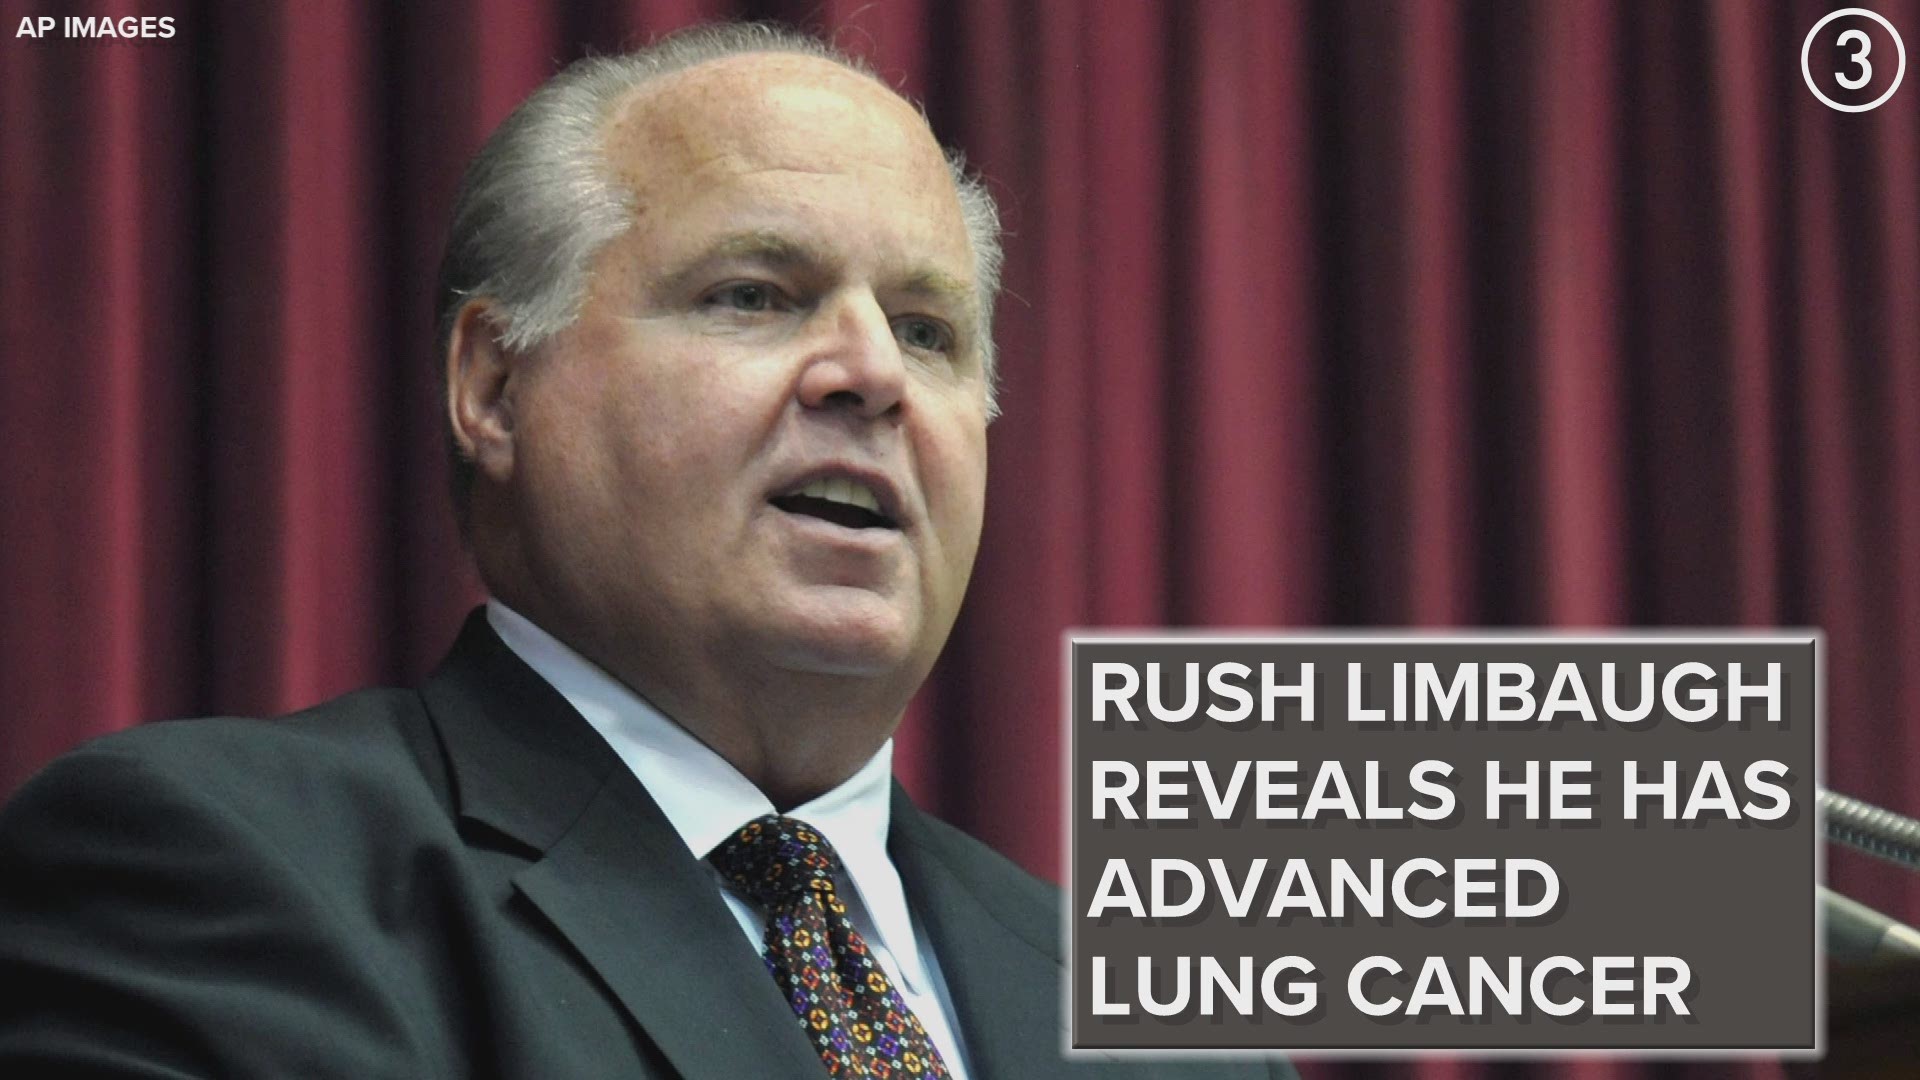 Sad news involving Rush Limbaugh.  The radio talk show host made the announcement Monday on his nationally-syndicated radio show.